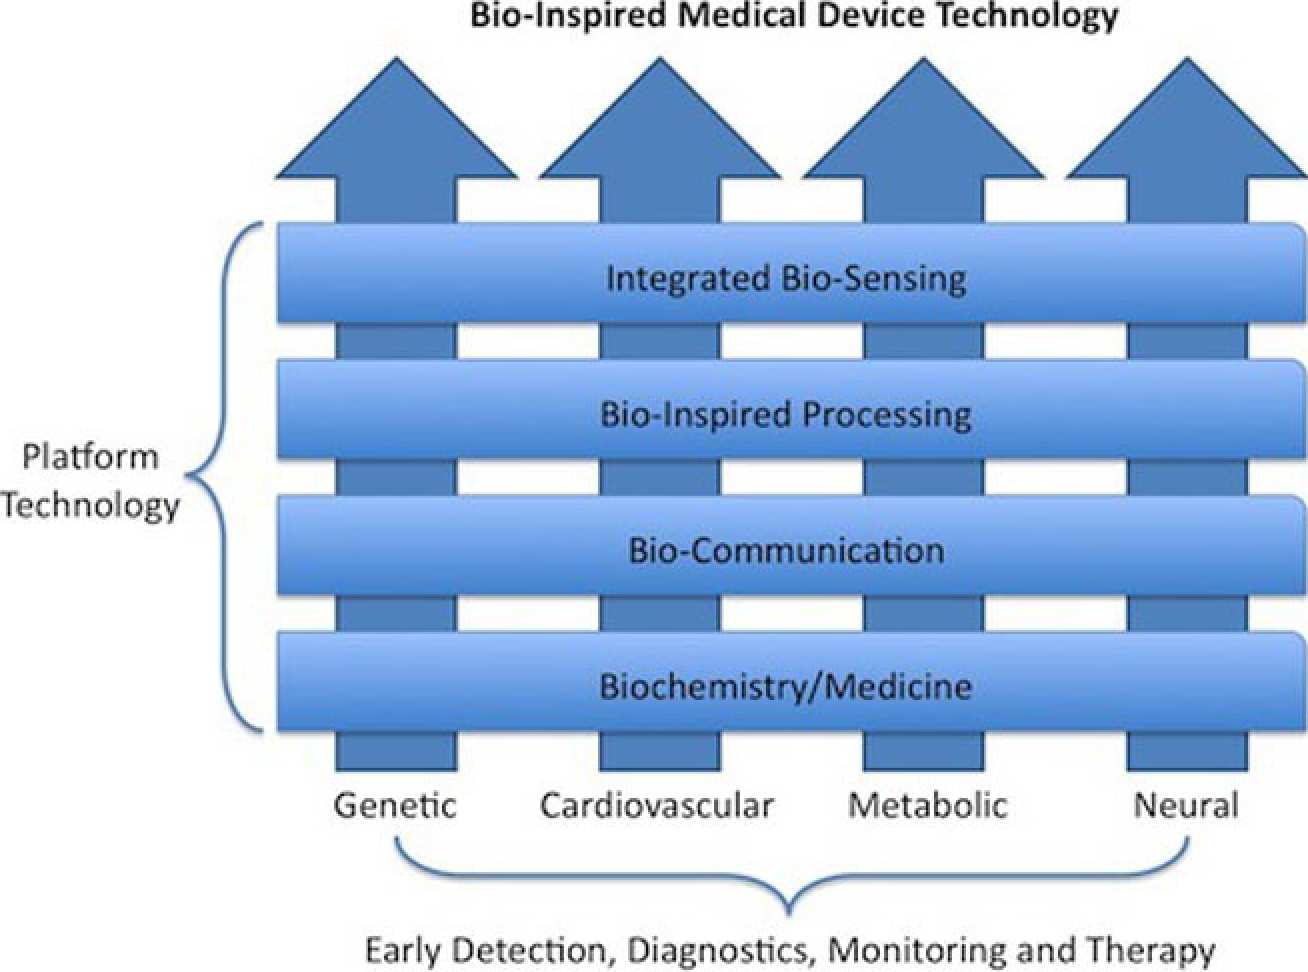 The diagram illustrates how the intersections between the enabling technologies and application domains have defined research projects. We plan to widen the applications of the technology to encompass other disease areas as the technology platforms become developed.